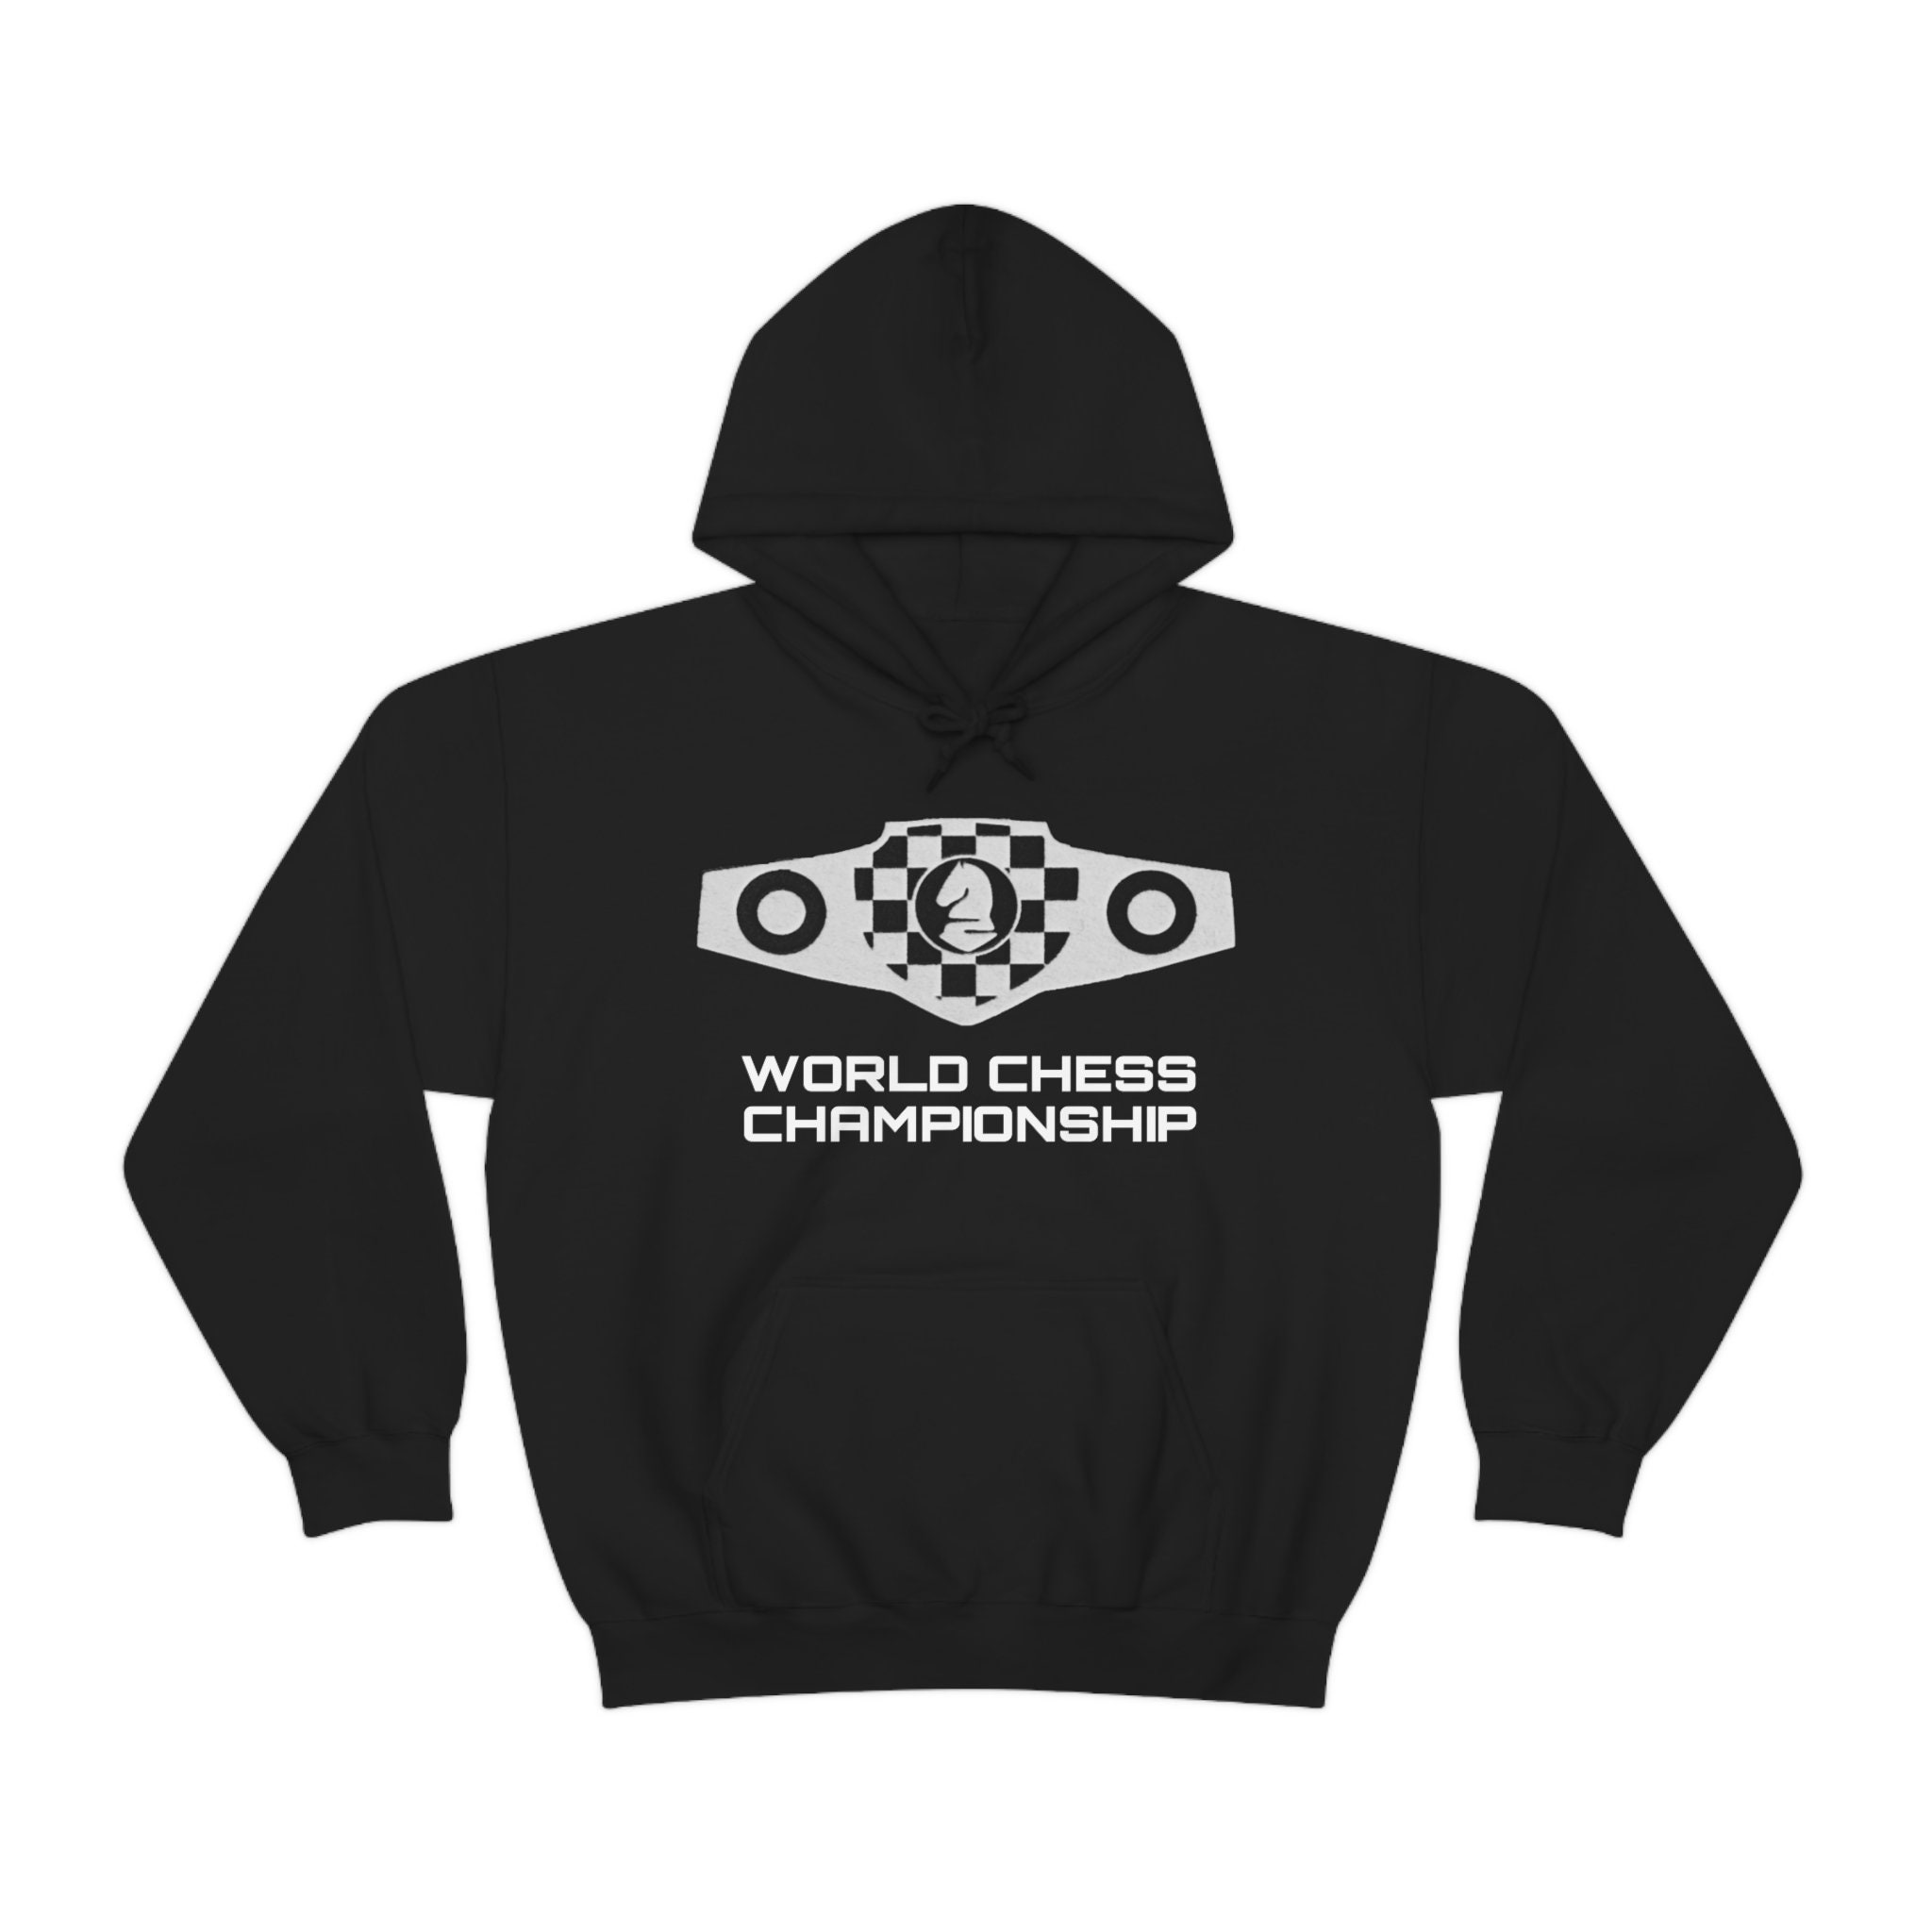 Checkmate University Vintage College Varsity Chess Player Pullover Hoodie